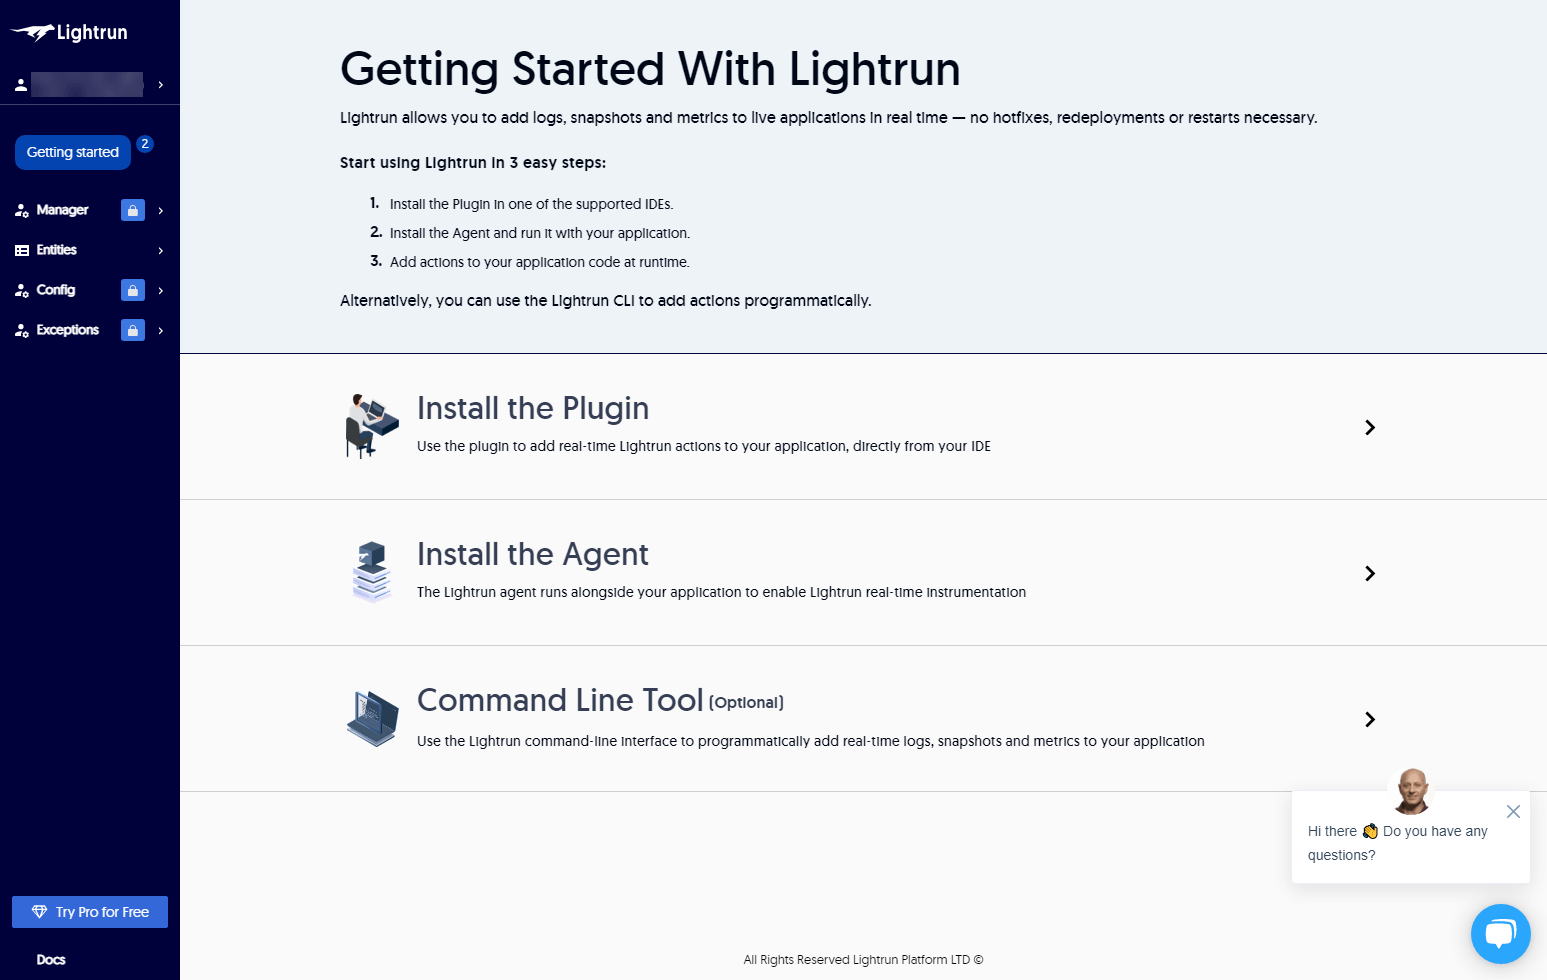 Getting Started with Lightrun